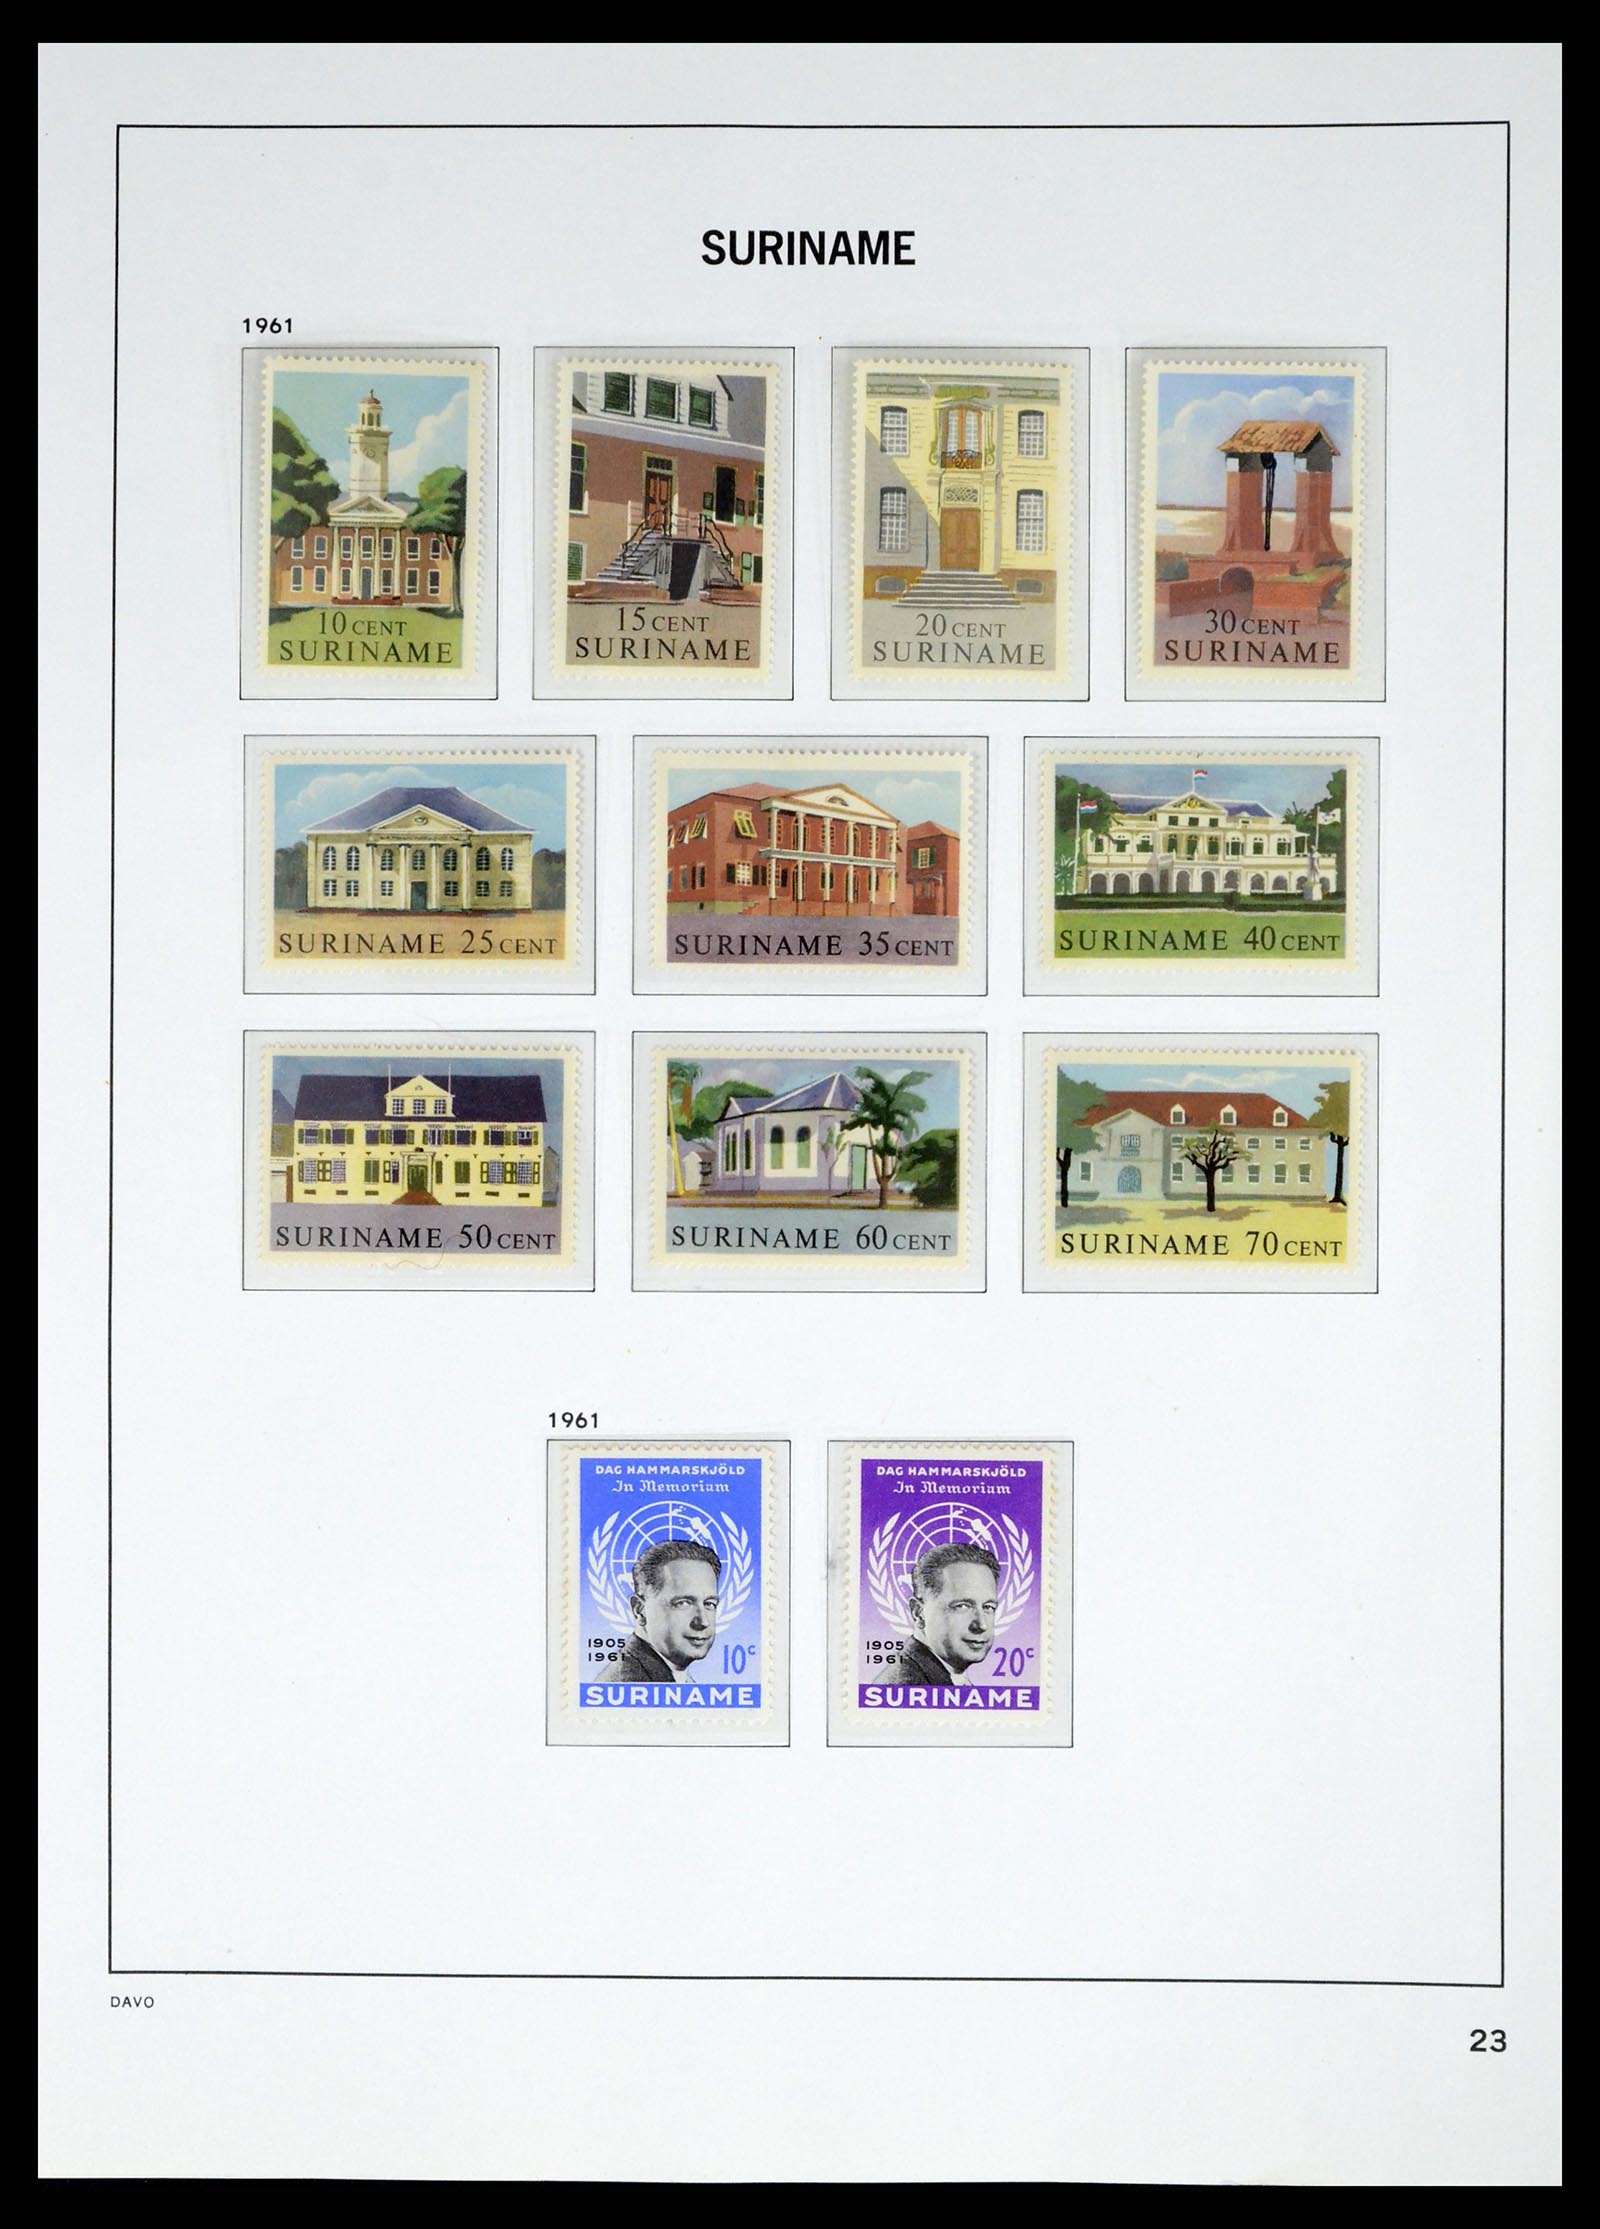 37421 025 - Stamp collection 37421 Suriname 1873-1975.